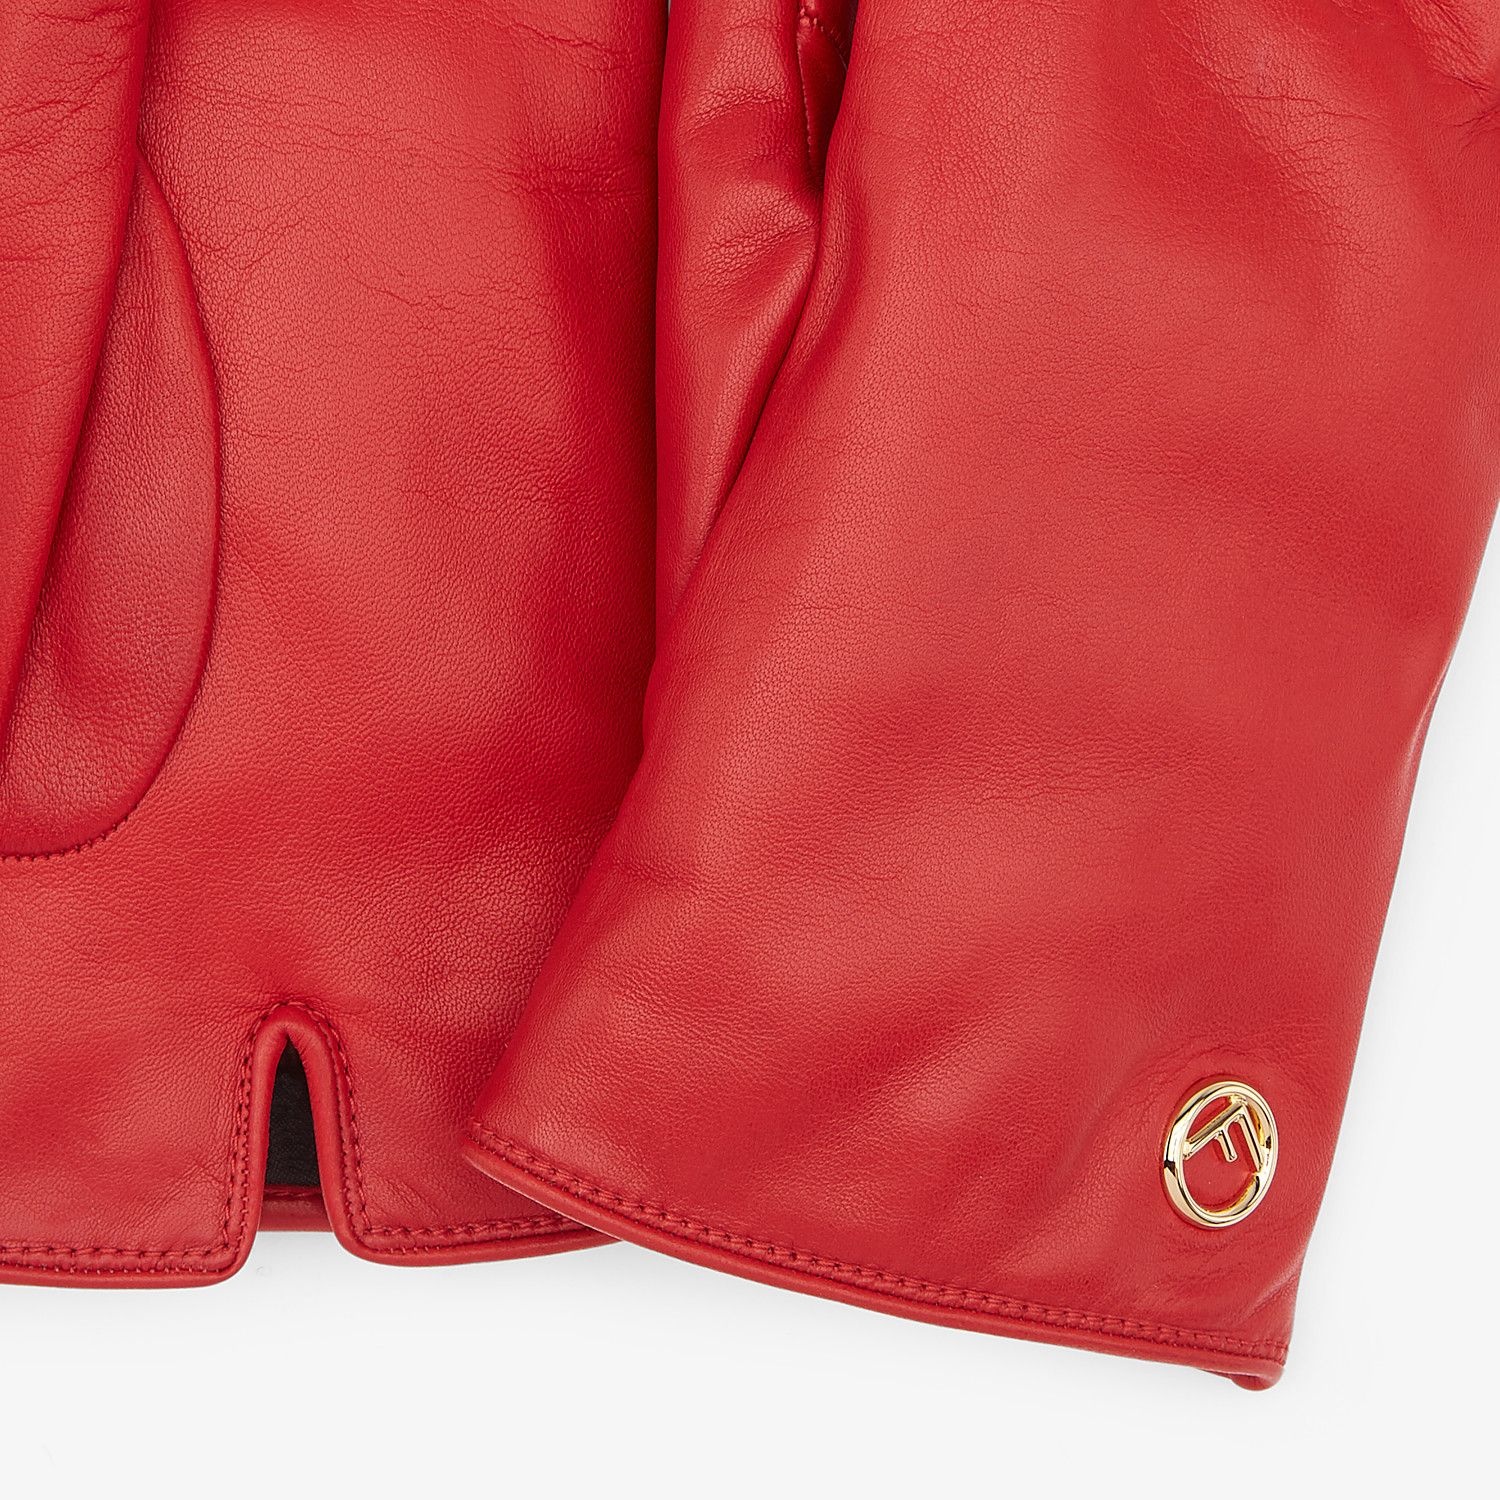 Red nappa leather gloves - 2